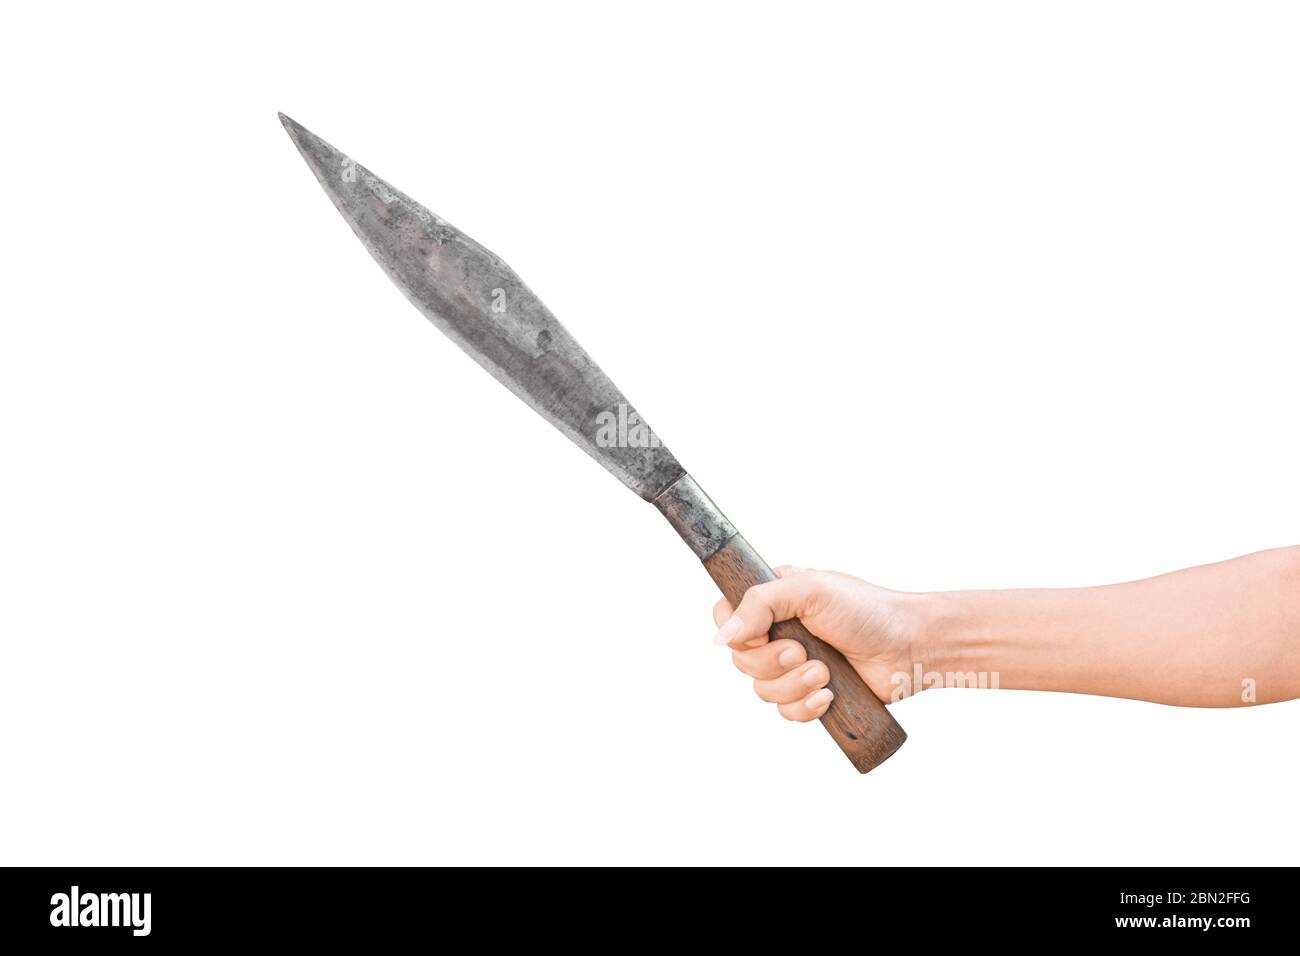 https://c8.alamy.com/comp/2BN2FFG/hand-holding-the-big-knife-isolated-on-white-background-with-clipping-path-2BN2FFG.jpg